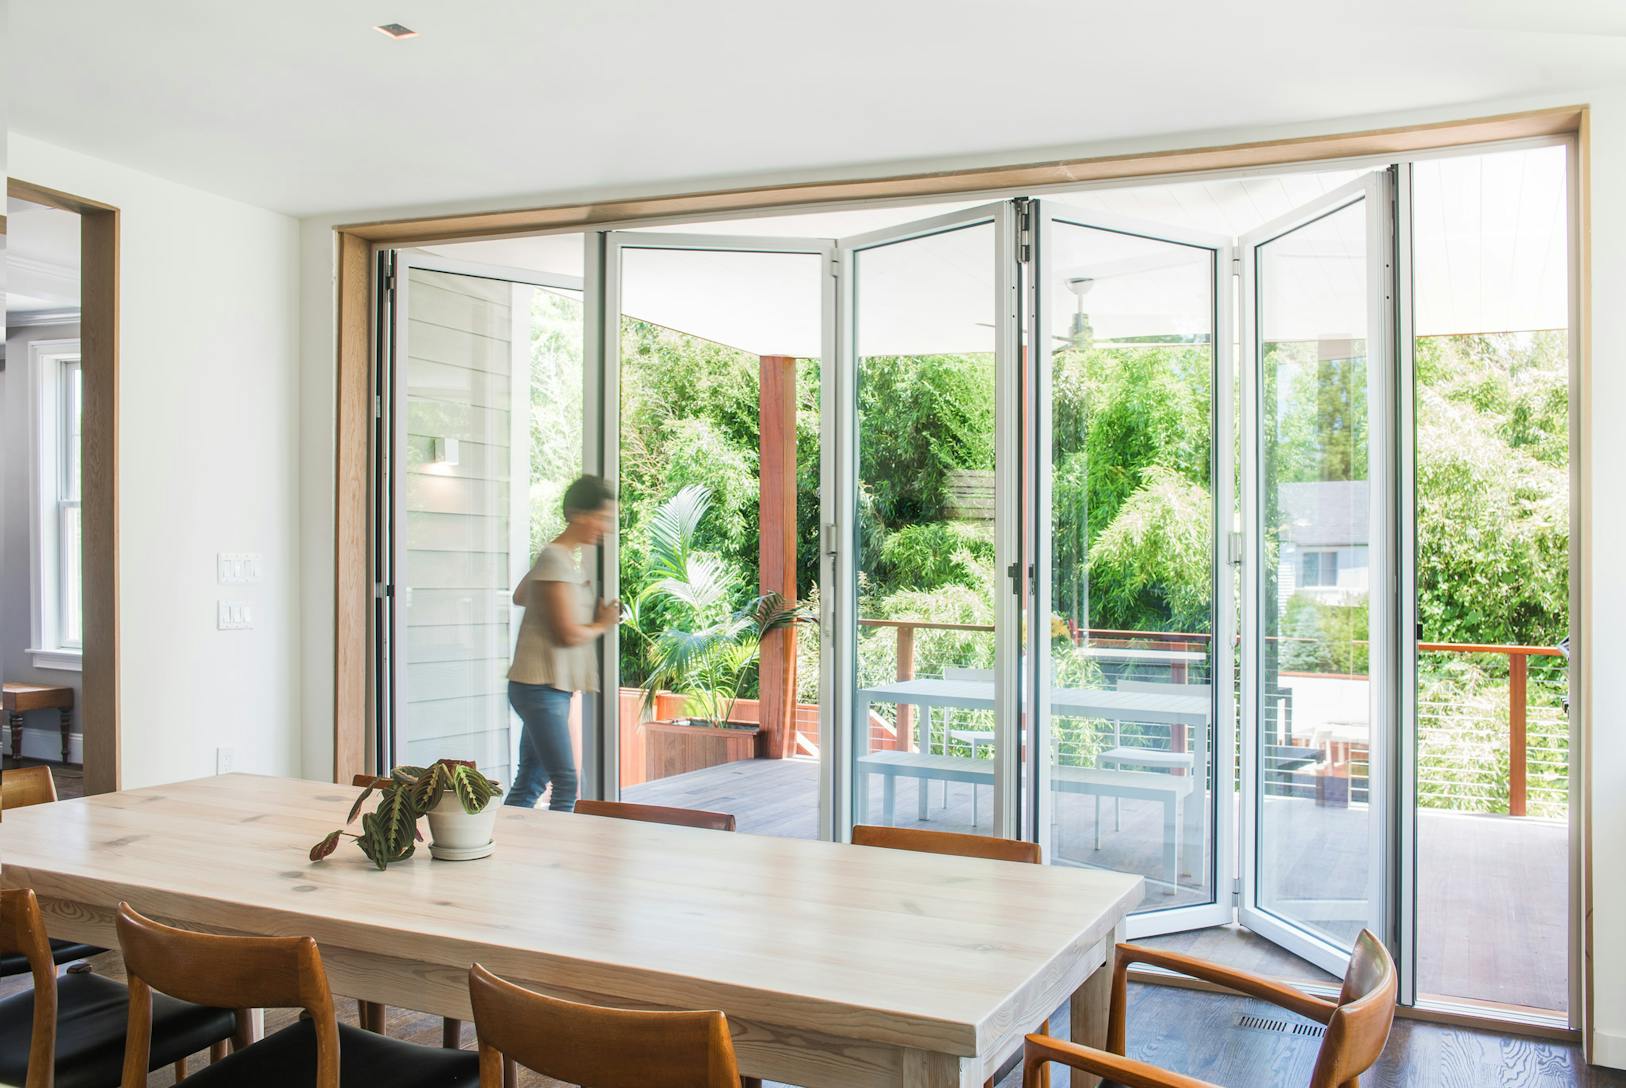 NW Aluminum 840 - a person standing in a dining room with large windows 